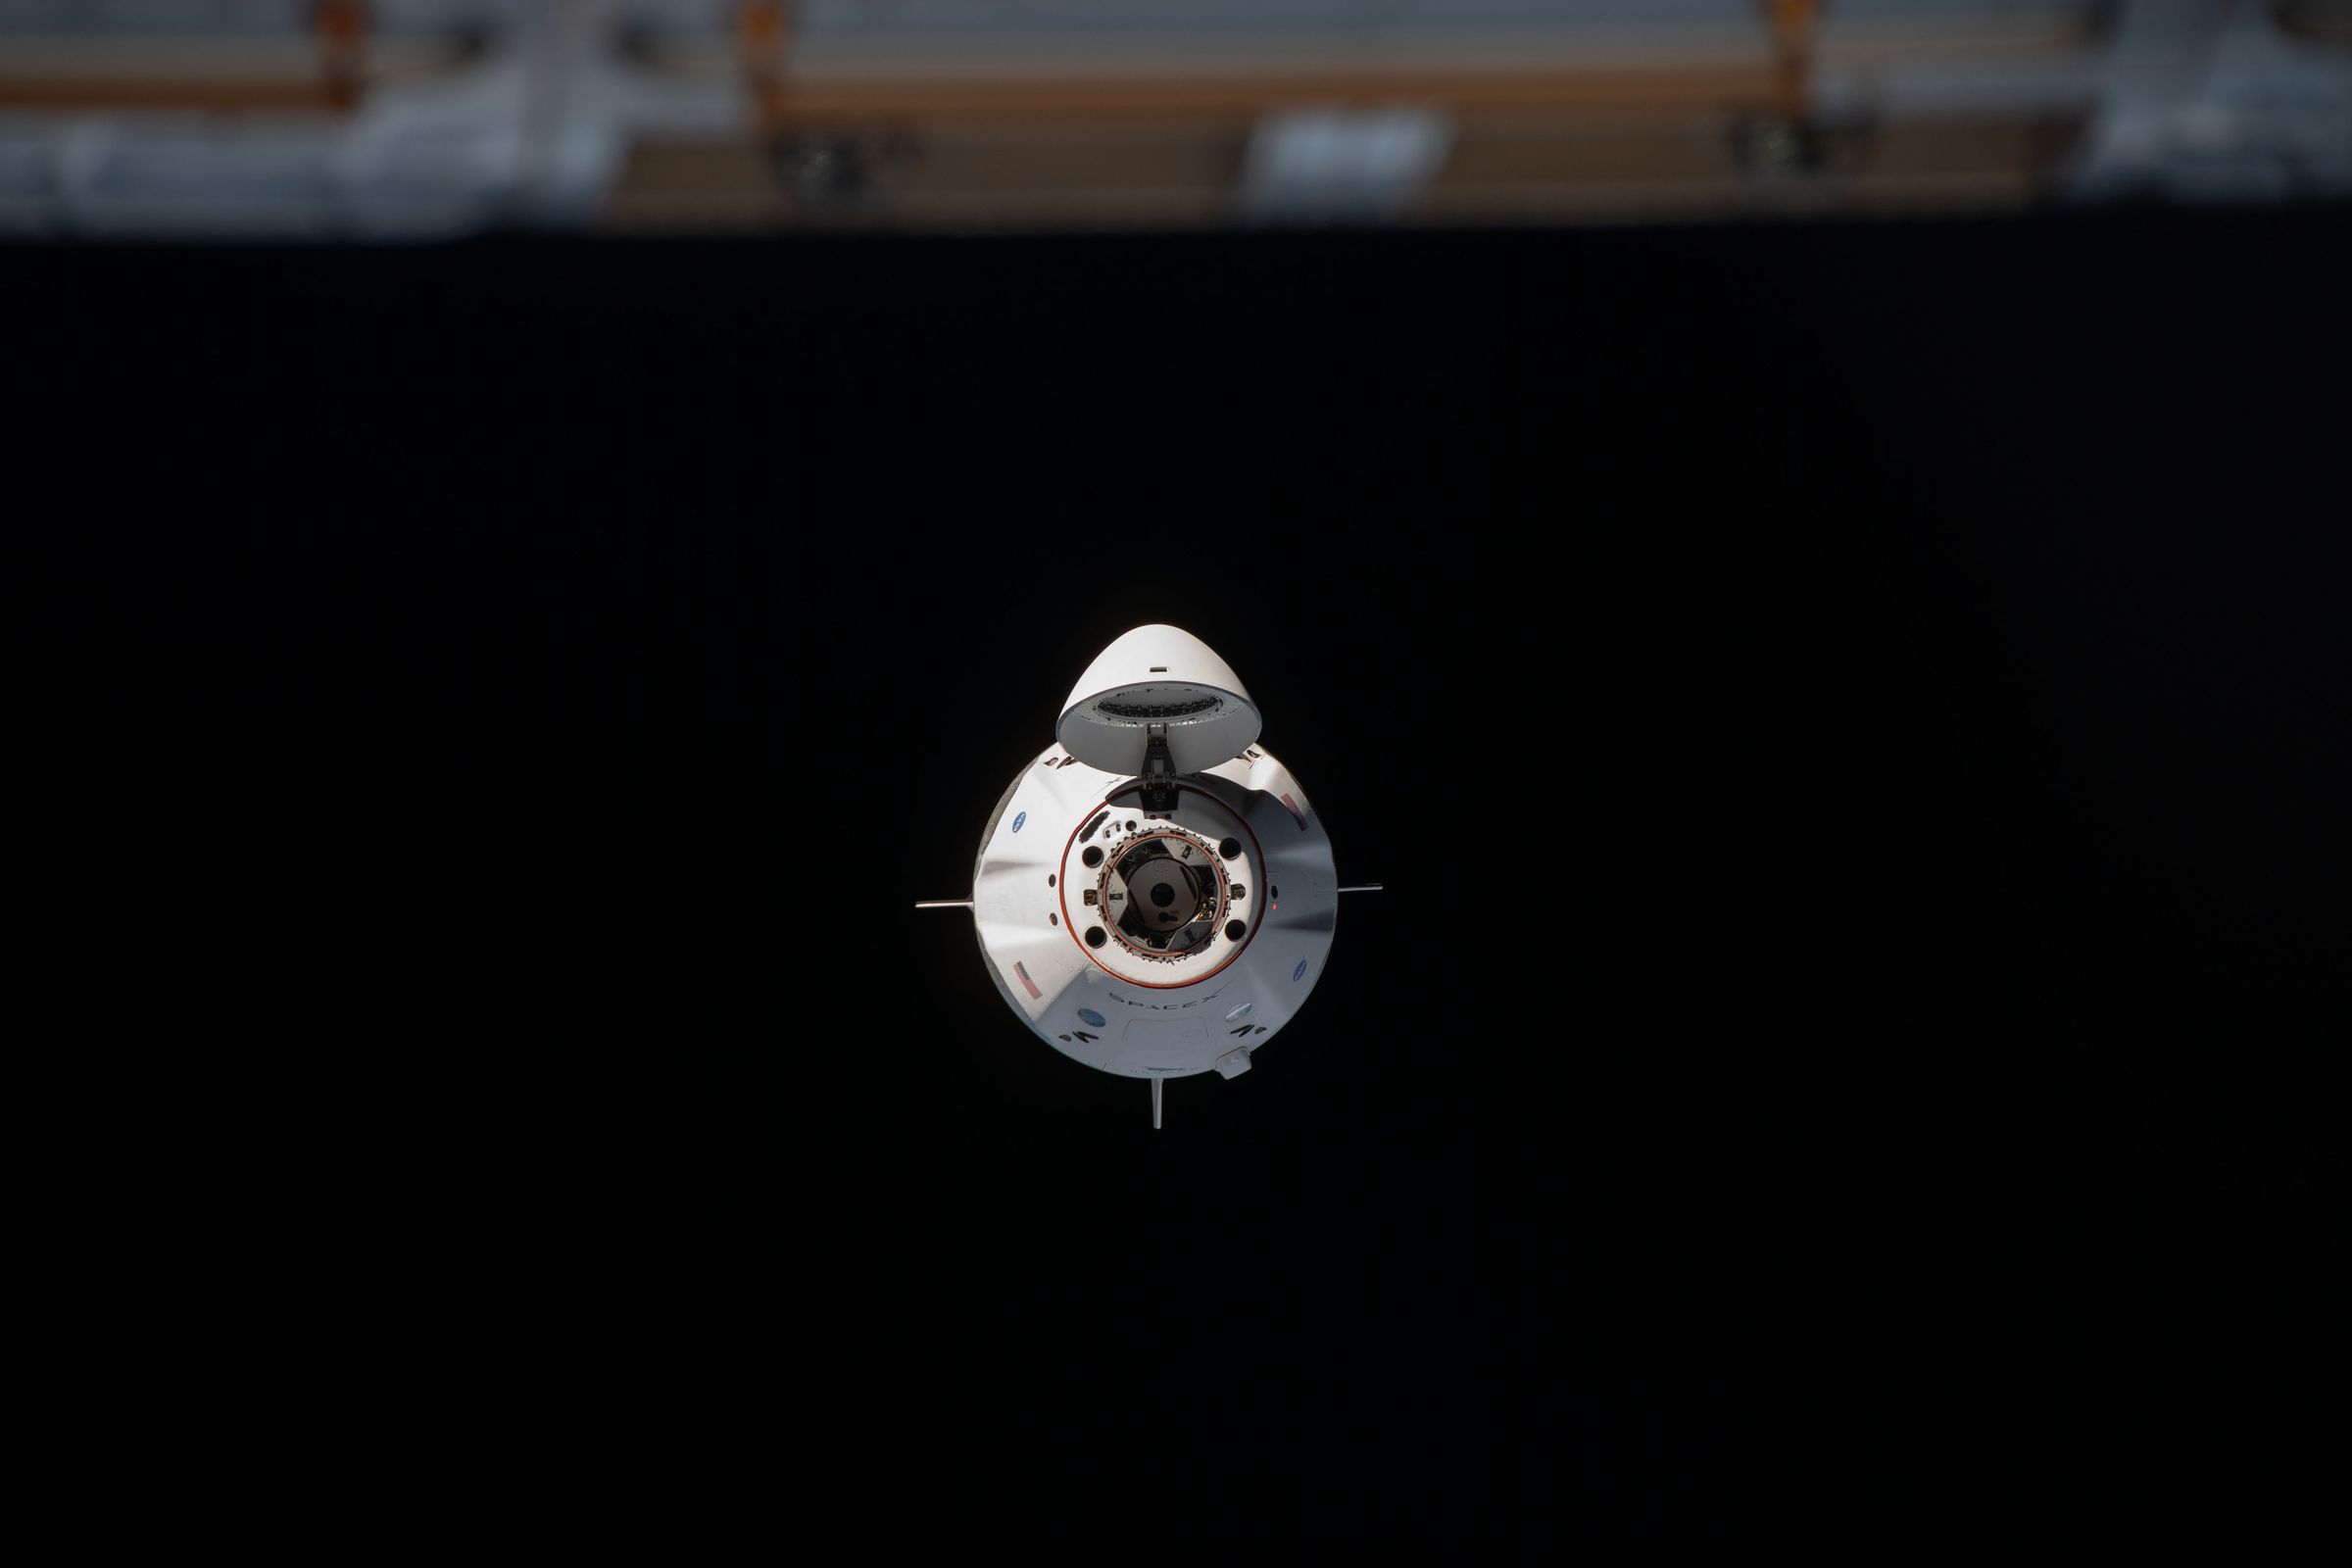 SpaceX’s Crew Dragon capsule approaches the International Space Station carrying three US astronauts and a Japanese astronaut on November 17th, 2020.